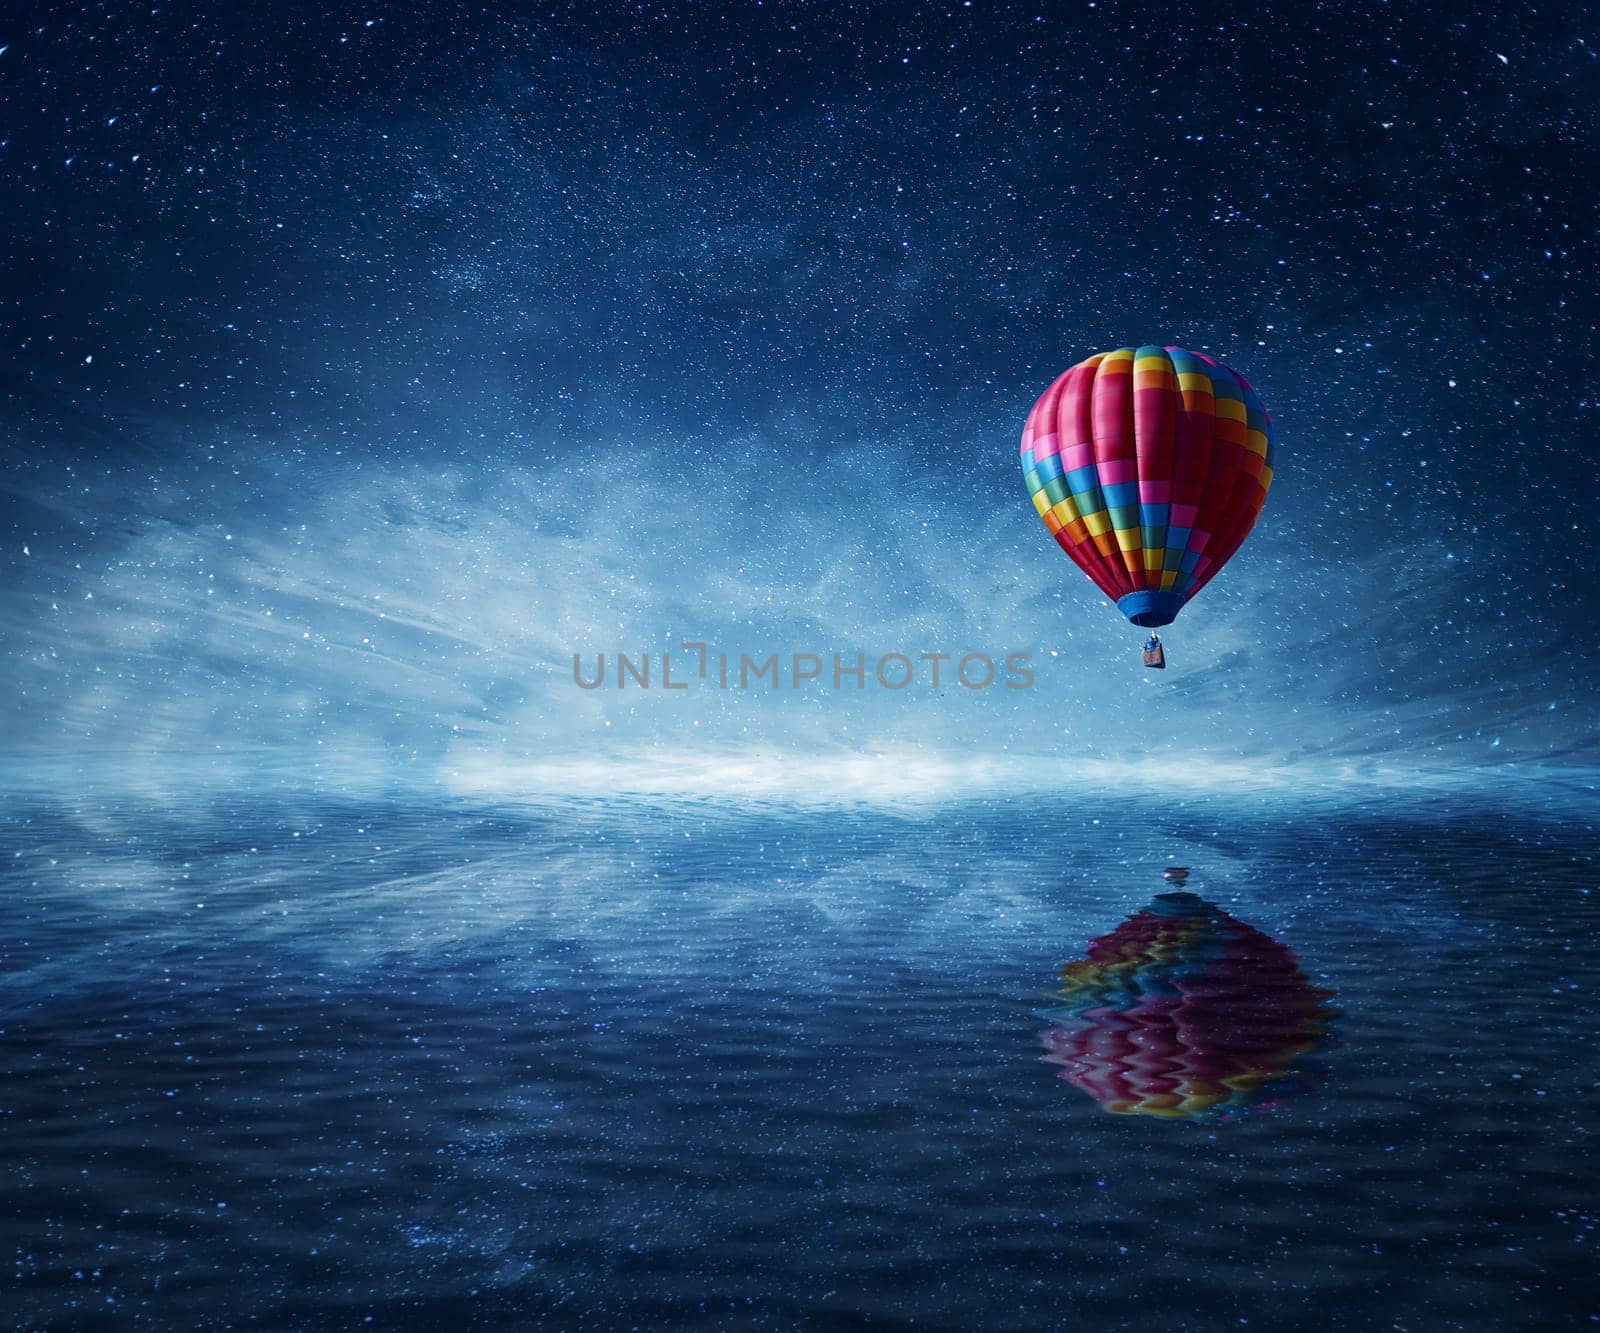 Hot air balloon flying over the a cold dark blue sea. Wonderful landscape with a starry night sky background and water reflection.